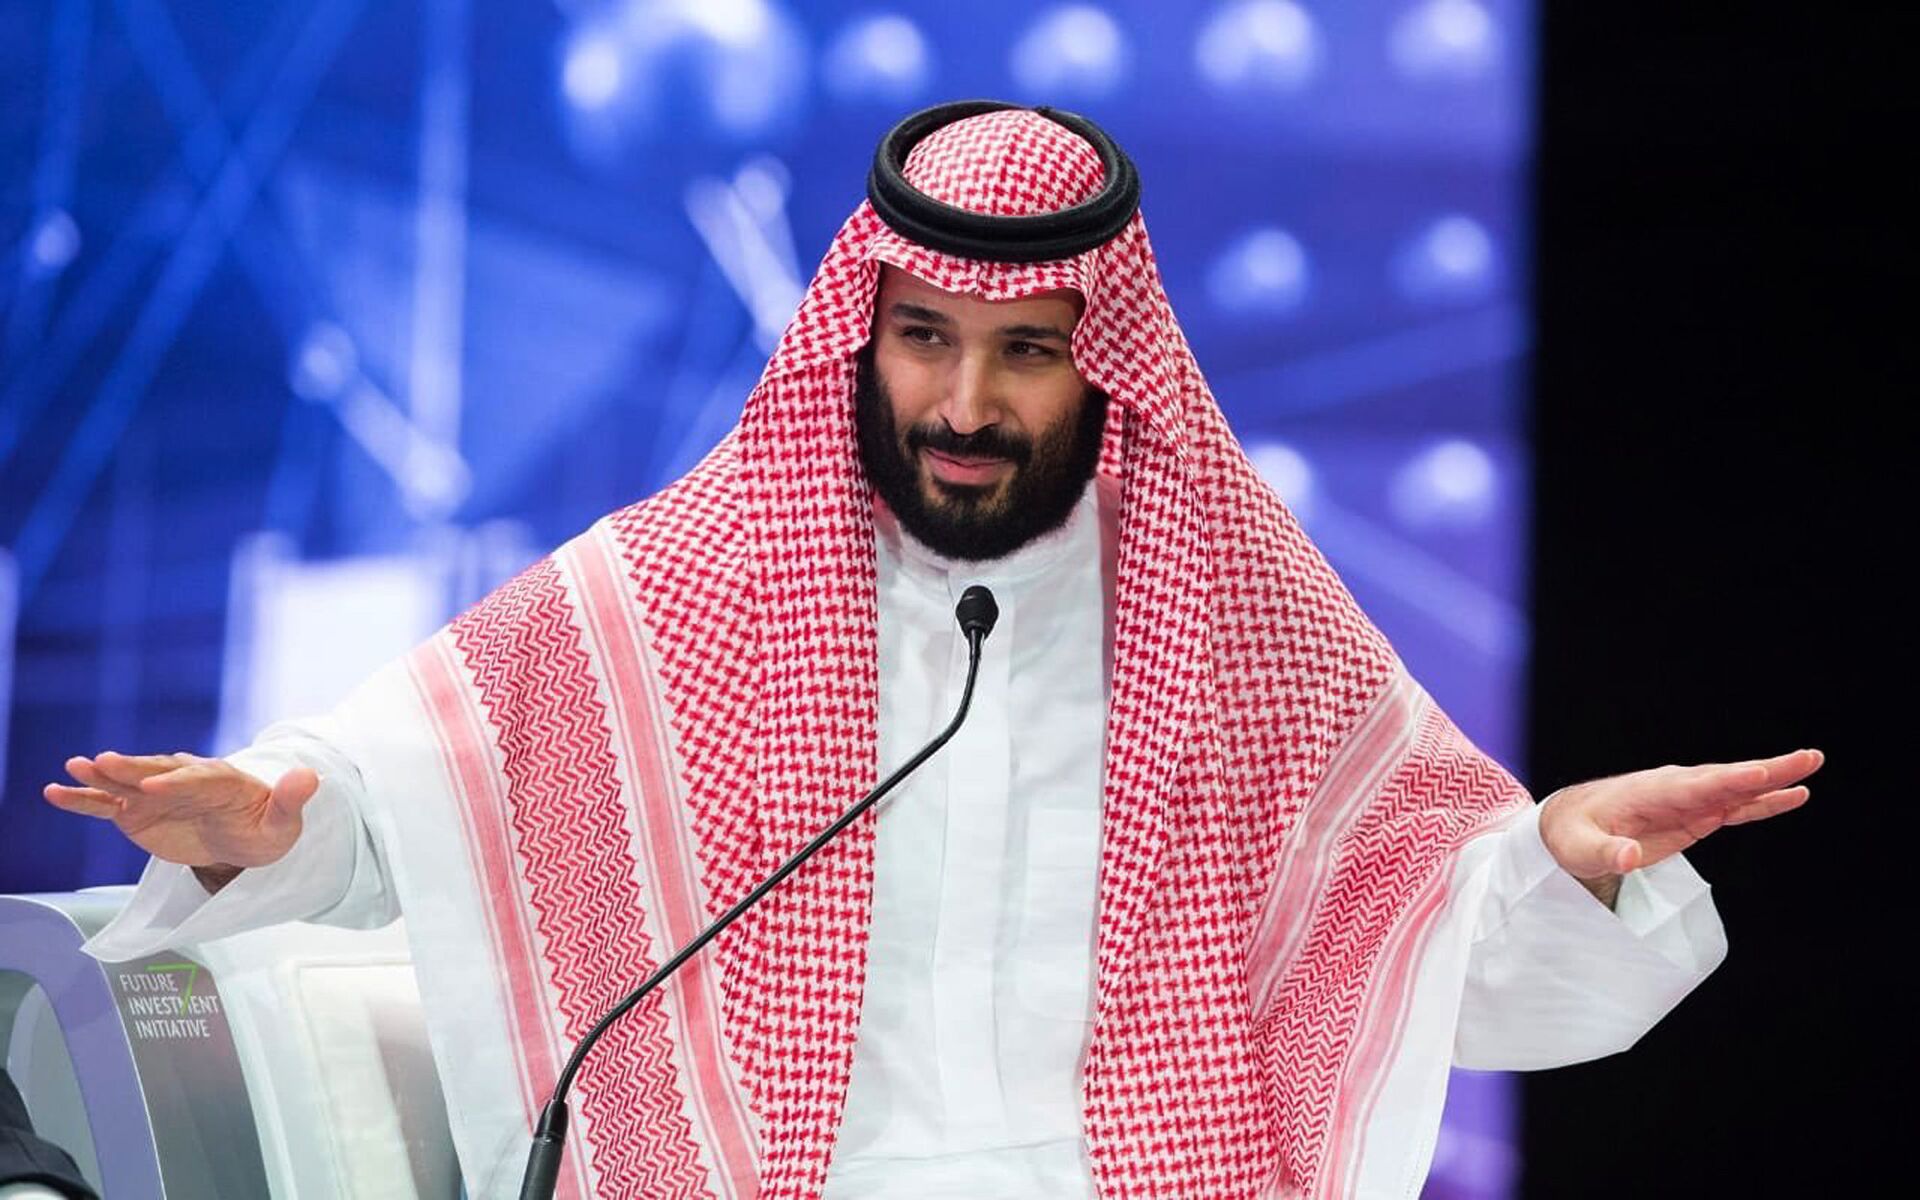 In this photo released by Saudi Press Agency, SPA, Saudi Crown Prince, Mohammed bin Salman addresses the Future Investment Initiative conference, in Riyadh, Saudi Arabia, Wednesday, Oct. 24, 2018 - Sputnik International, 1920, 09.06.2022